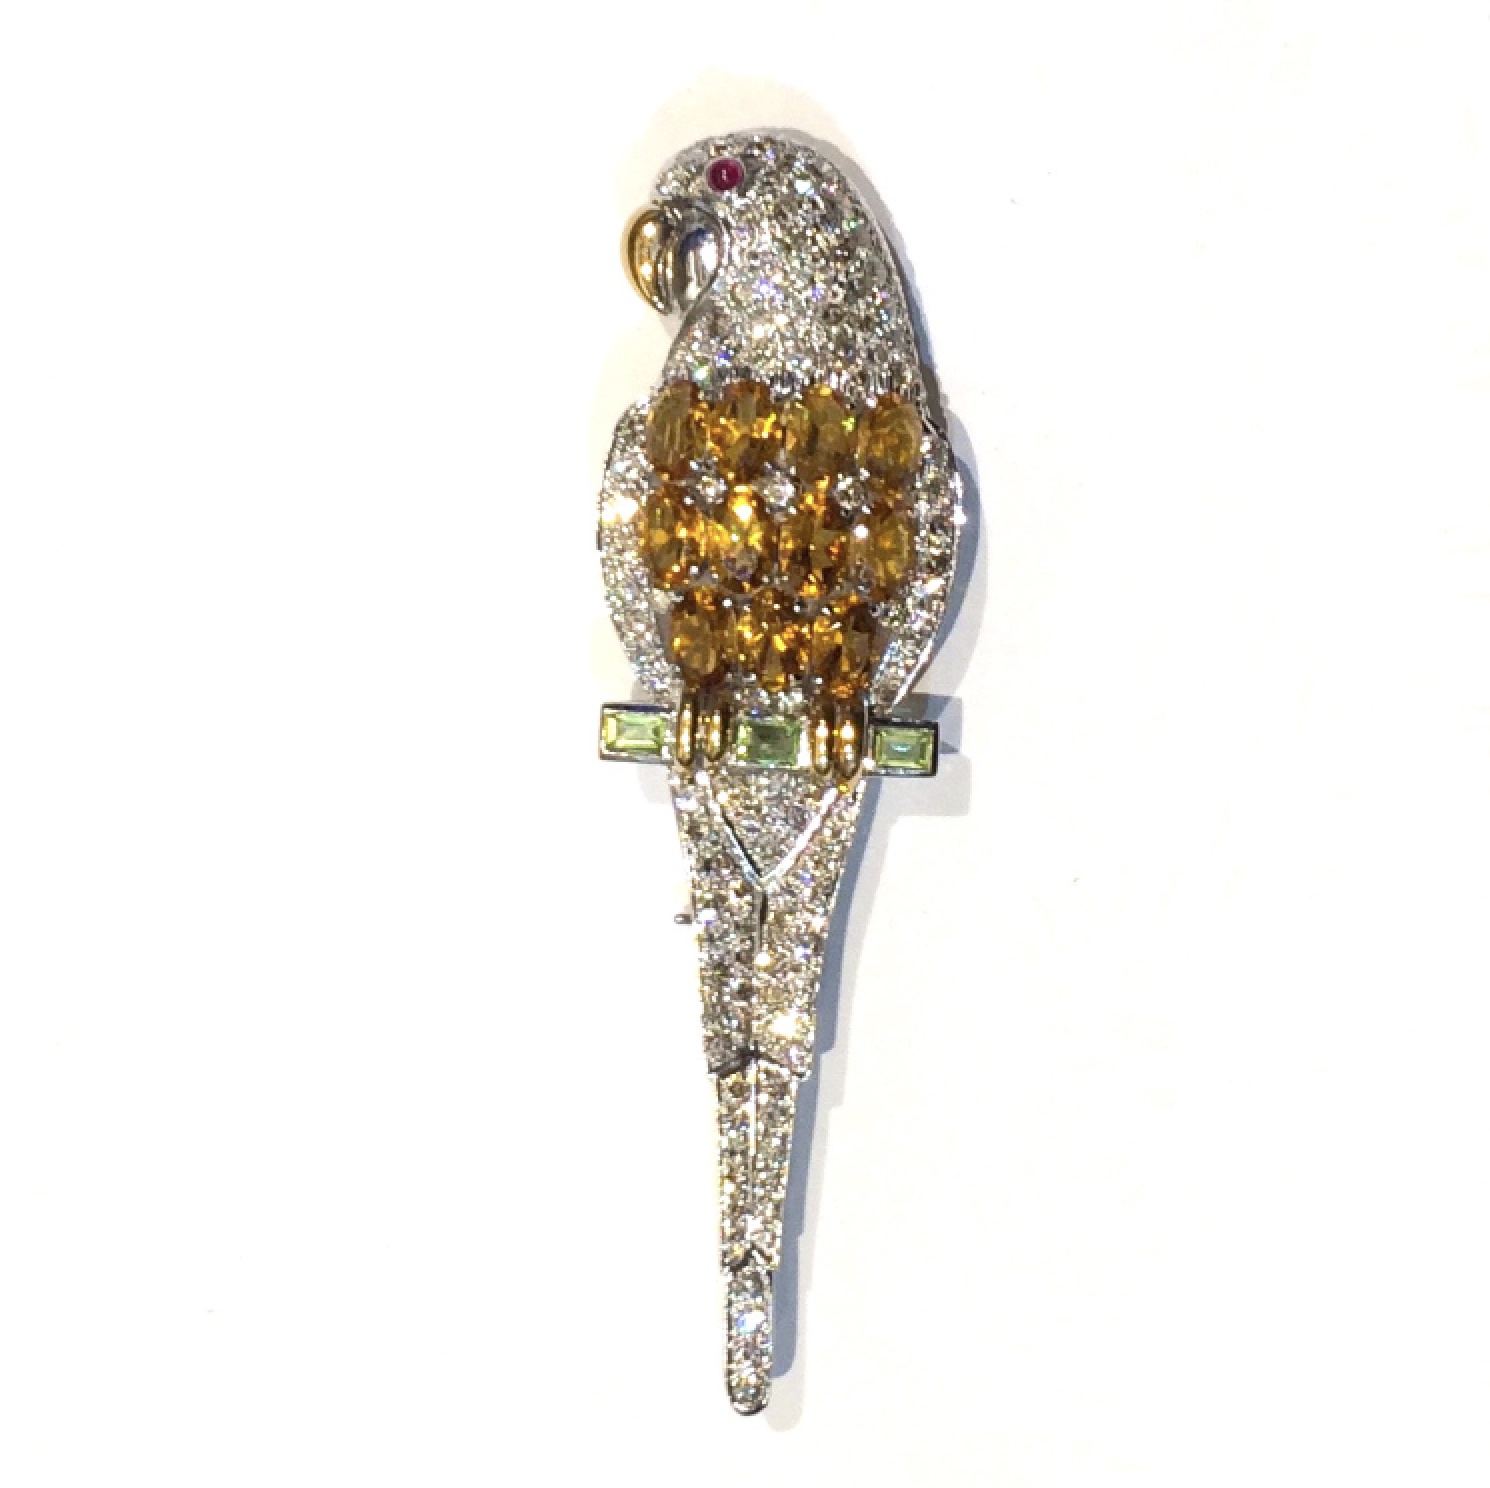 Trabert & Hoeffer, Mauboussin Art Deco “Parrot” brooch, 18k white and yellow gold set with 11 oval citrines (approximately 5 carats tw), three peridot baguettes and a cabochon ruby eye all further set against a pave diamond body (approximately 7 carats TW, 120+ count), signed, c.1935